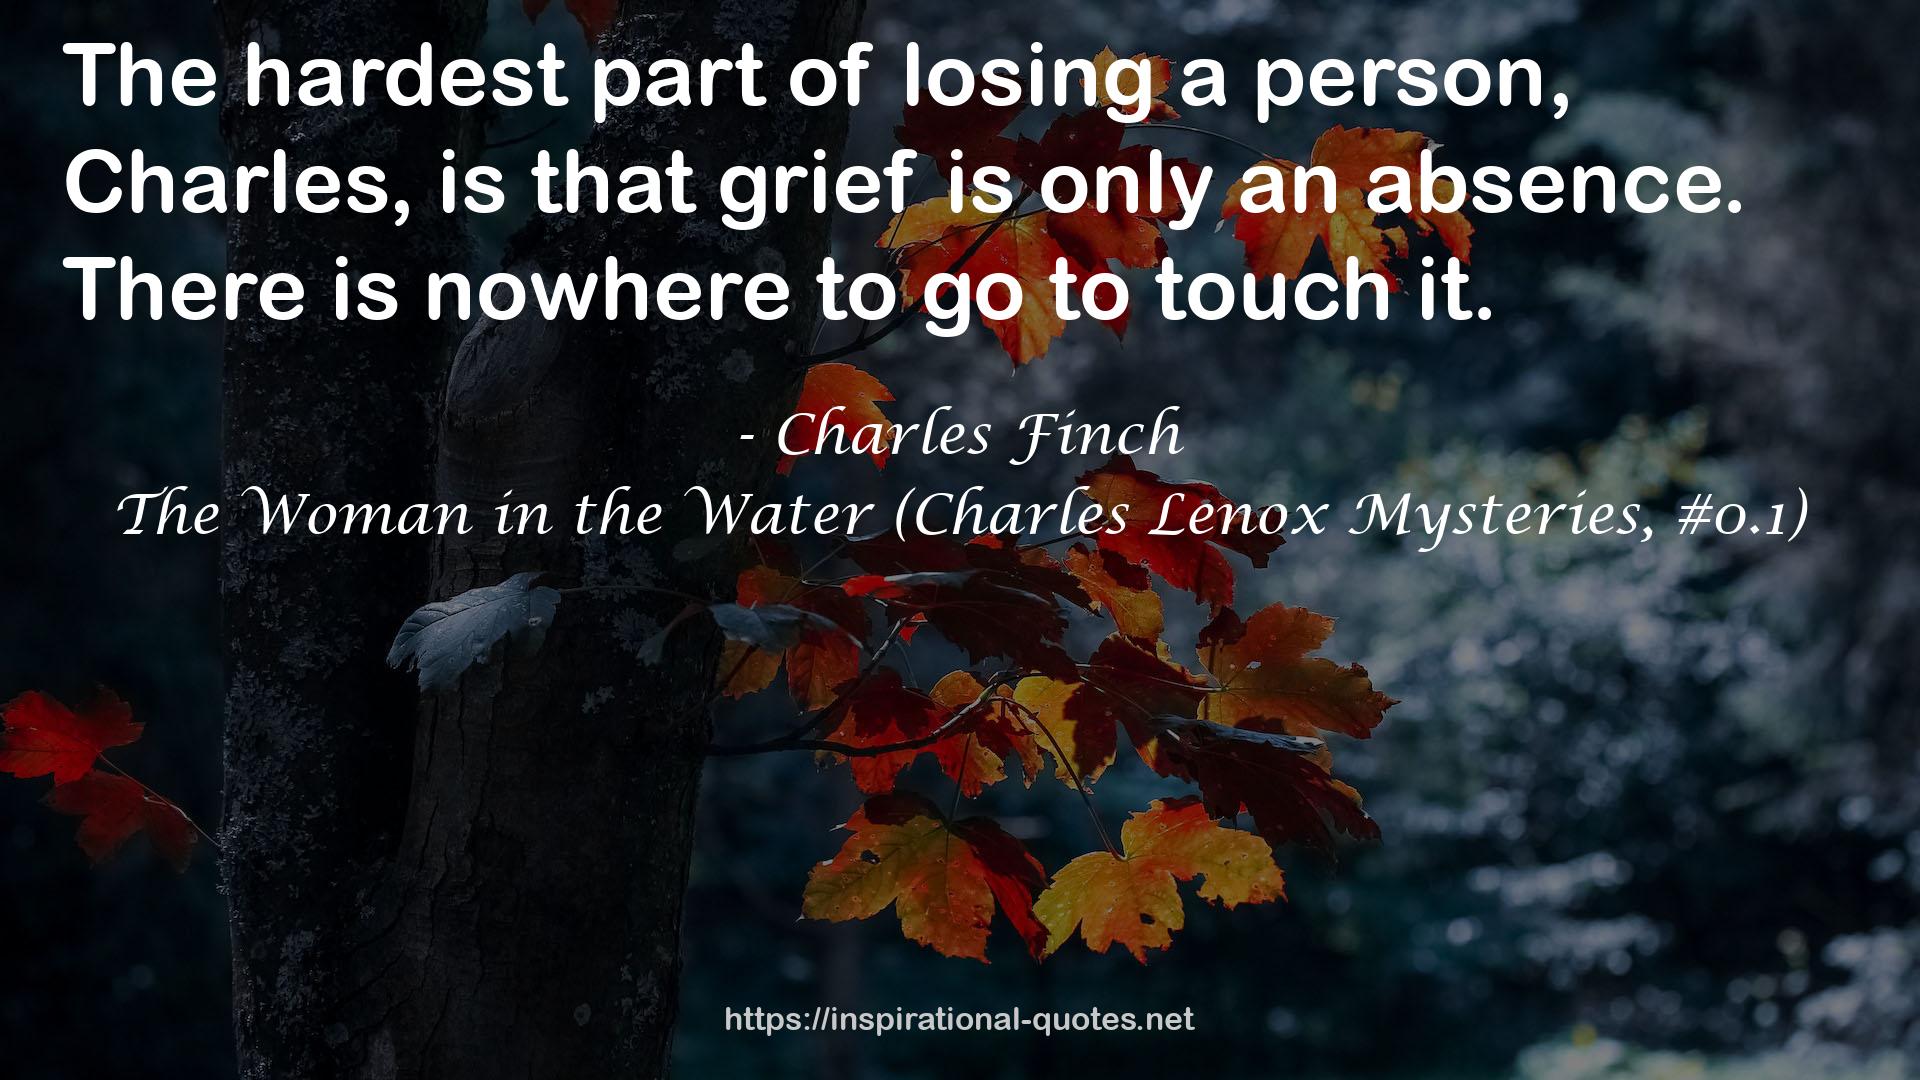 The Woman in the Water (Charles Lenox Mysteries, #0.1) QUOTES